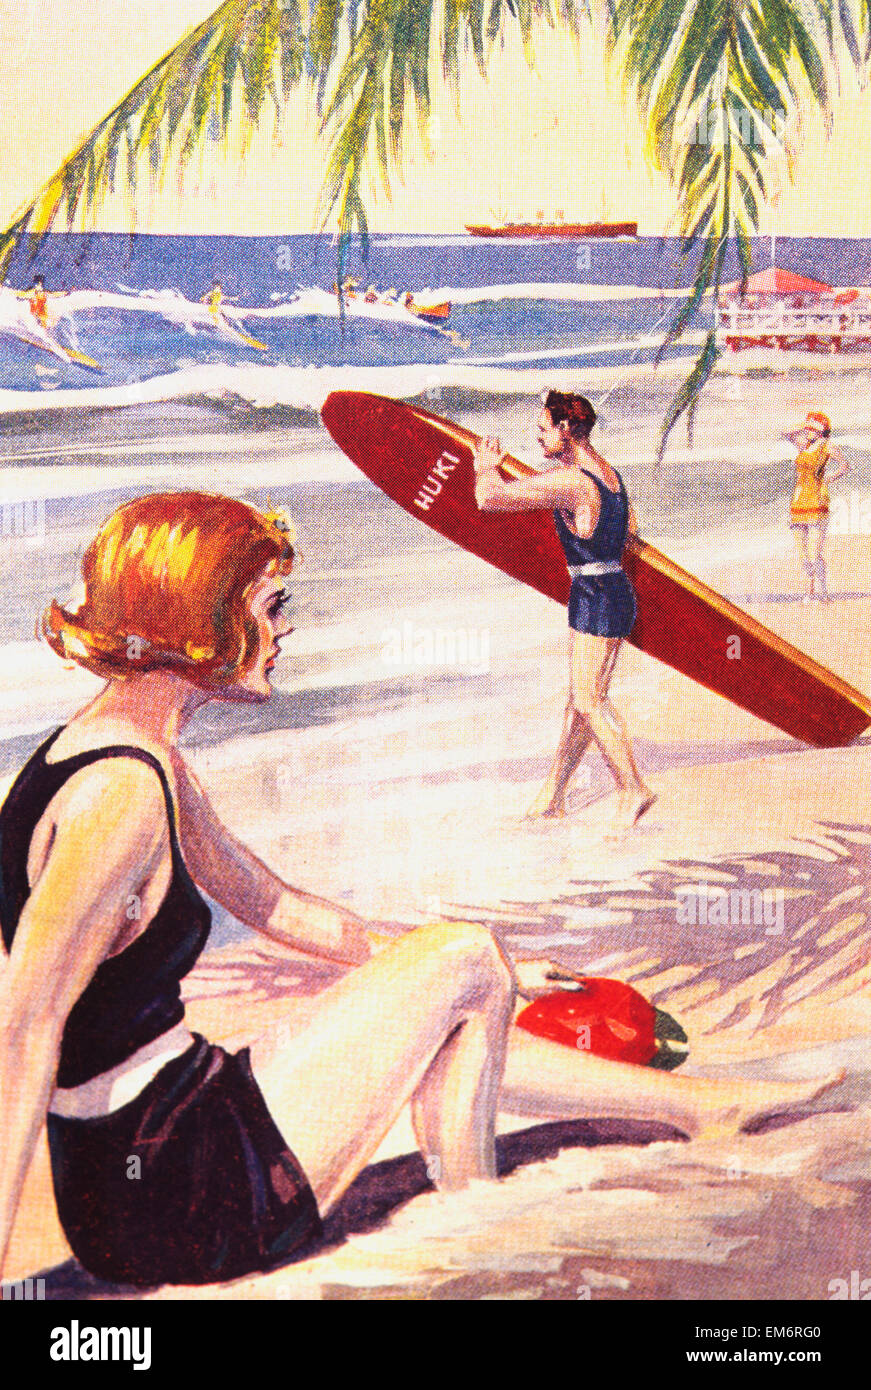 C.1925, Advertising Art, Hawaii, Side View Of Woman On Beach, Surfer Entering Water. Stock Photo